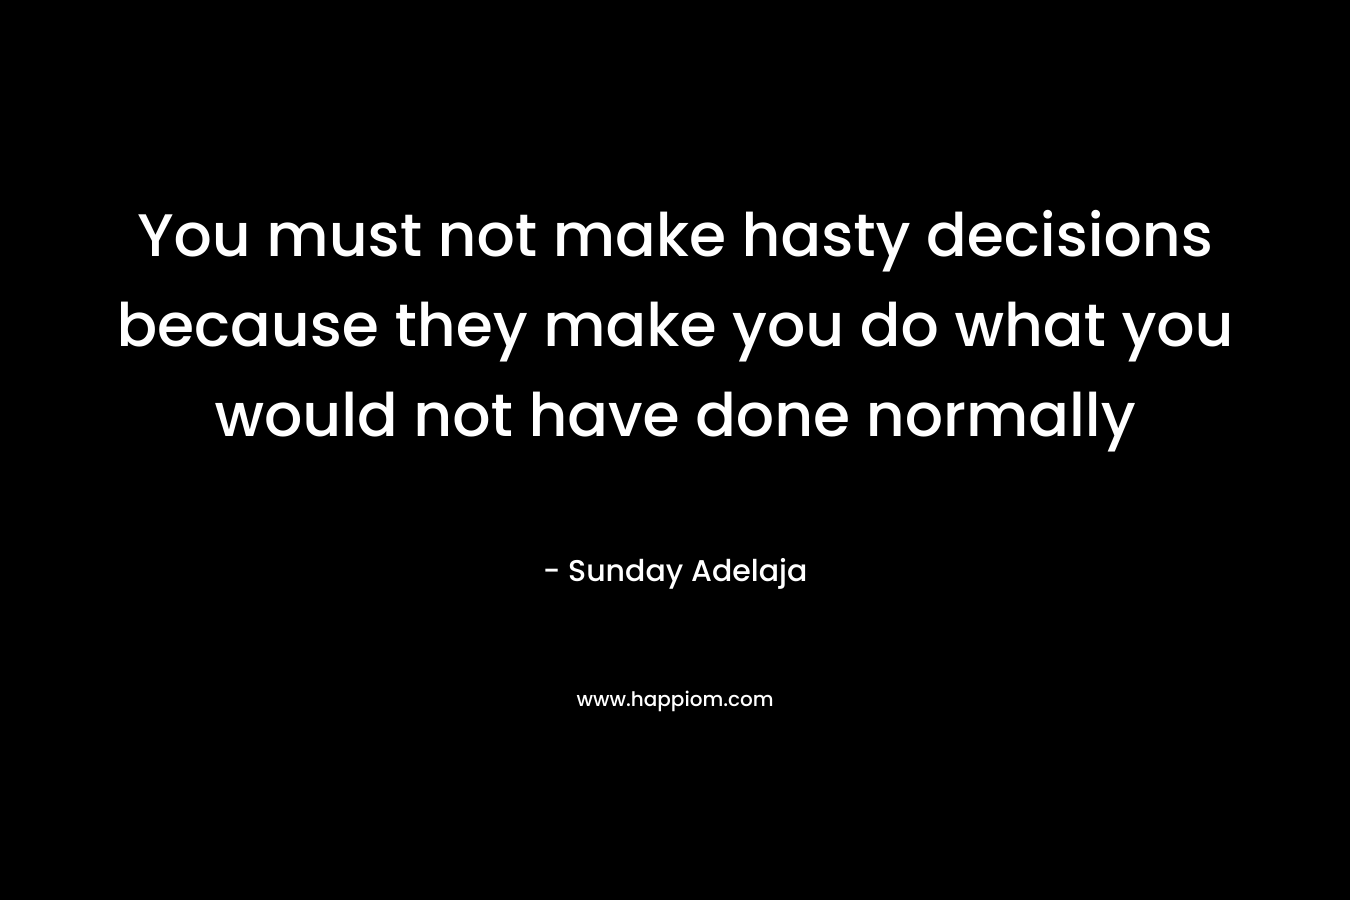 You must not make hasty decisions because they make you do what you would not have done normally